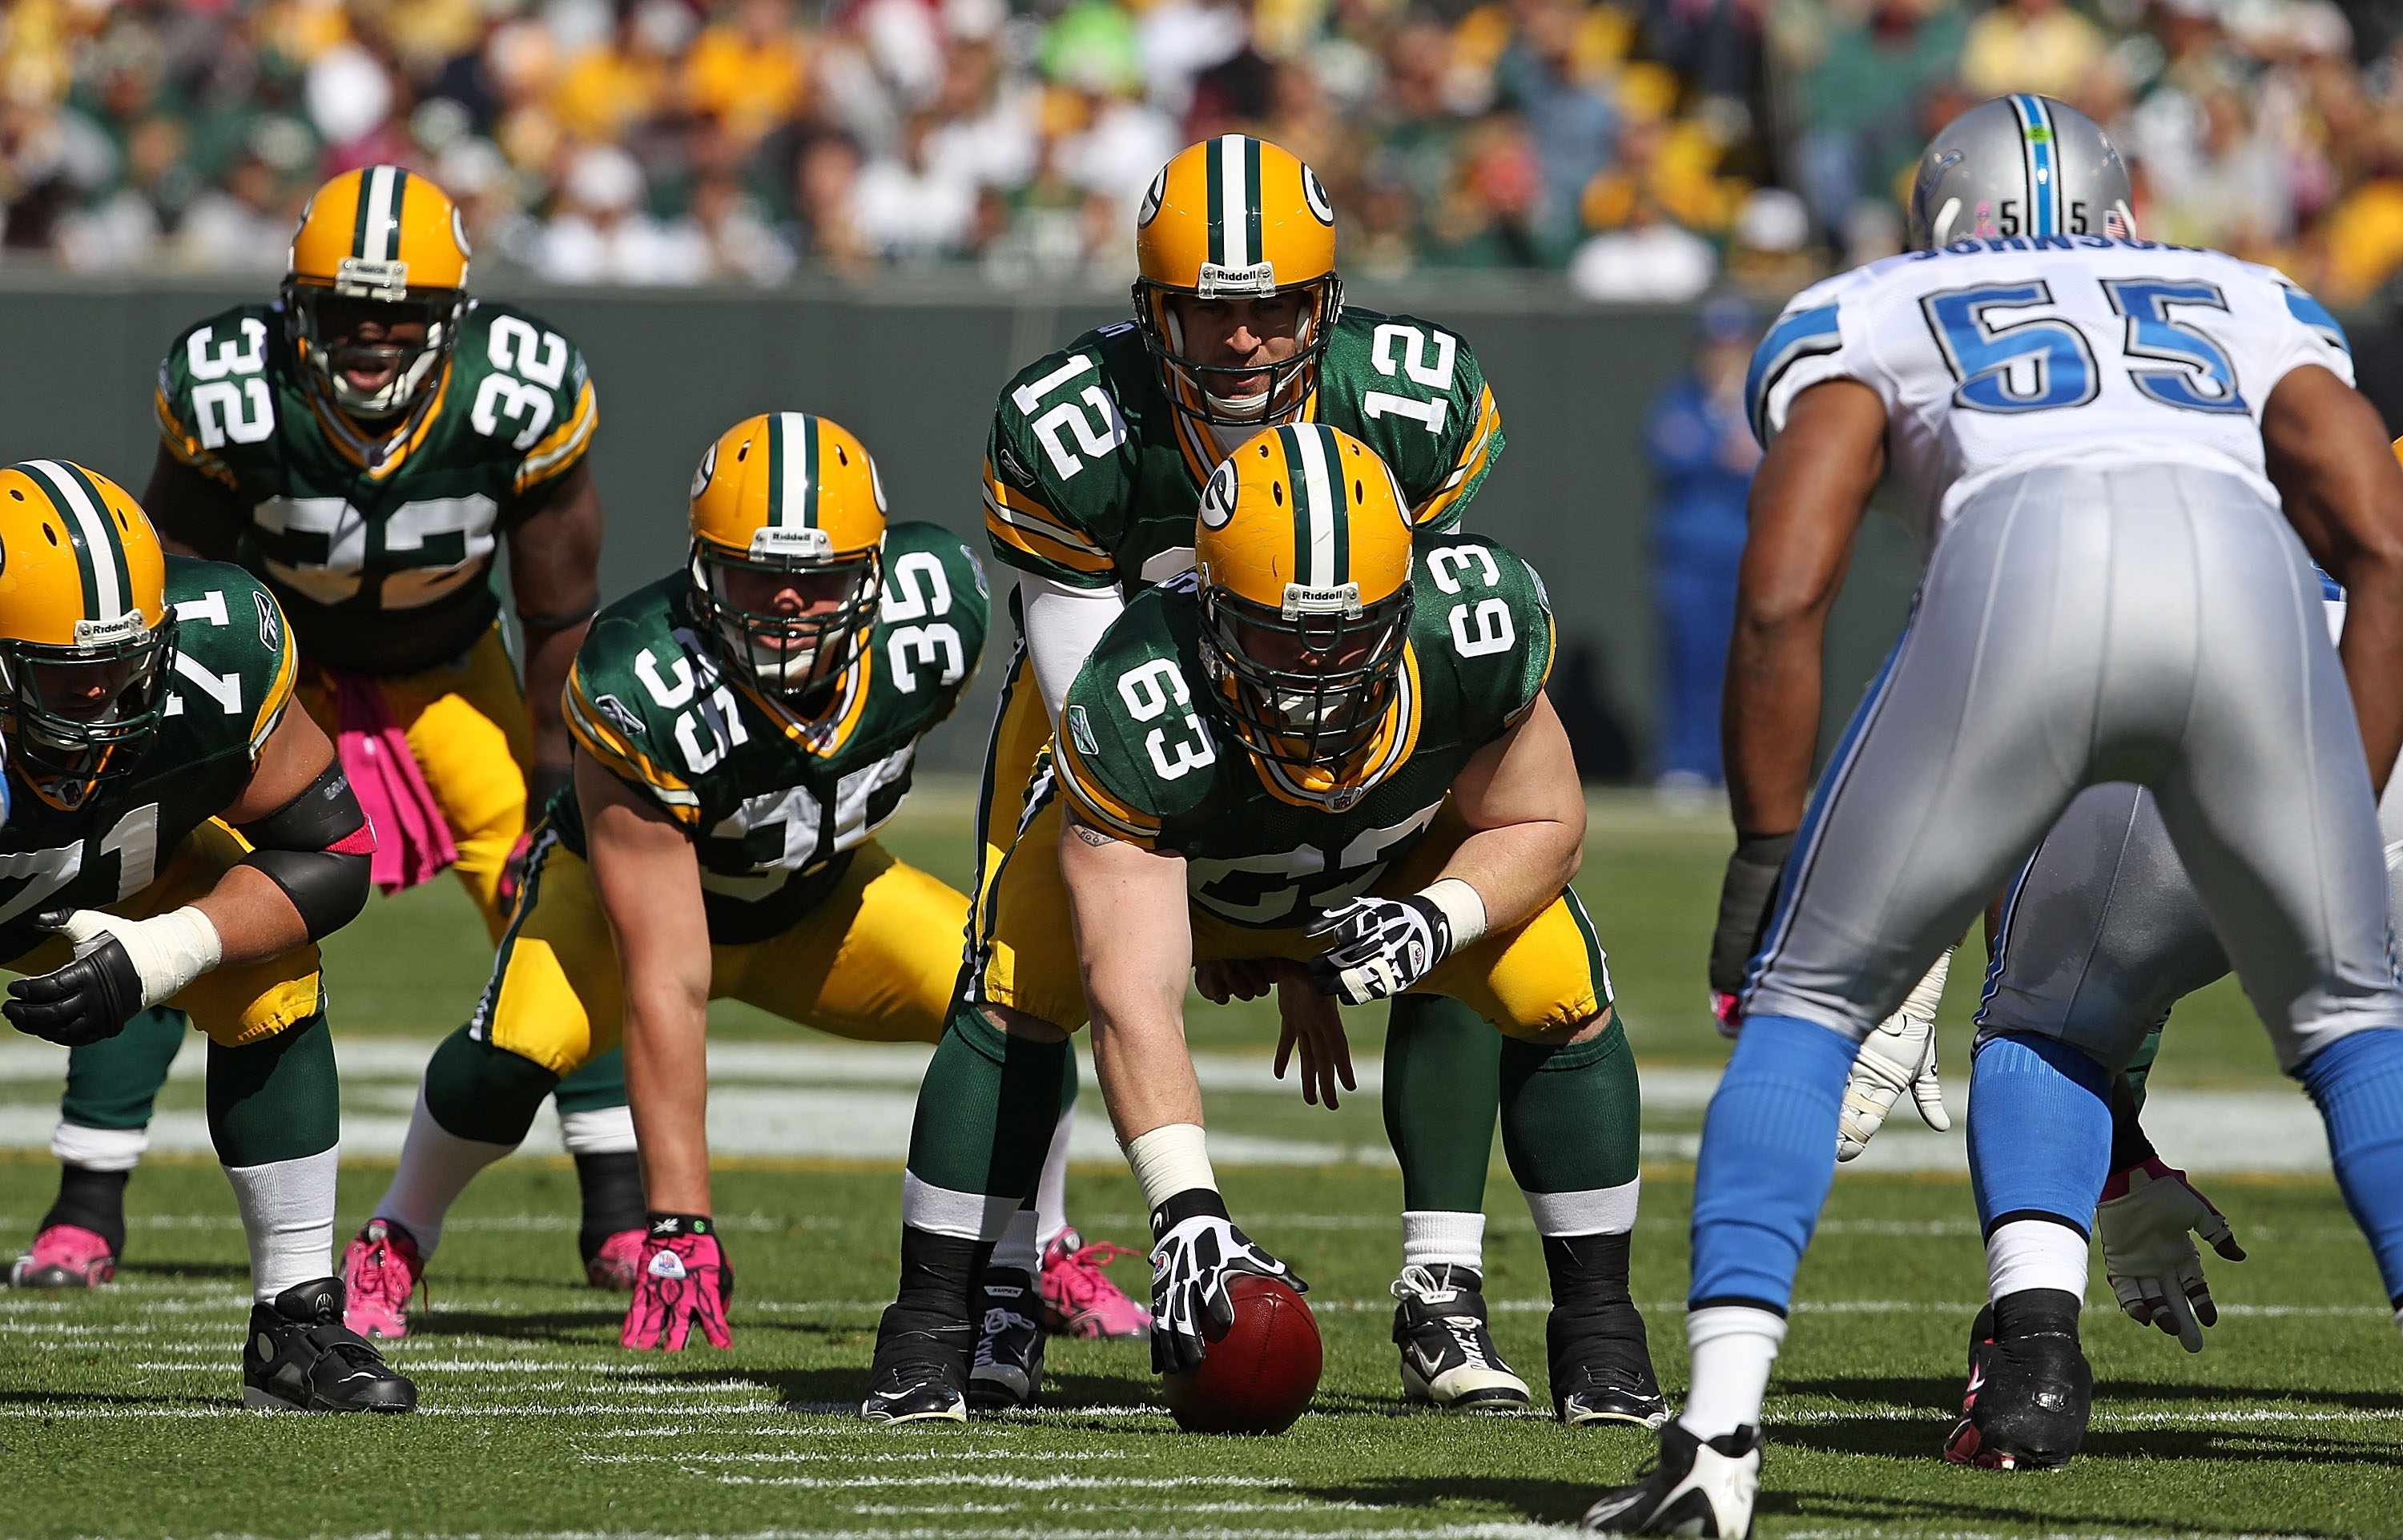 GREEN BAY, WI - OCTOBER 03: Aaron Rodgers #12 of the Green Bay Packers calls the signals as teammates Brandon Jackson #32, Korey Hall #35 and Scott Wells #63 await the snap while Landon Johnson #55 of the Detroit Lions watches at Lambeau Field on October